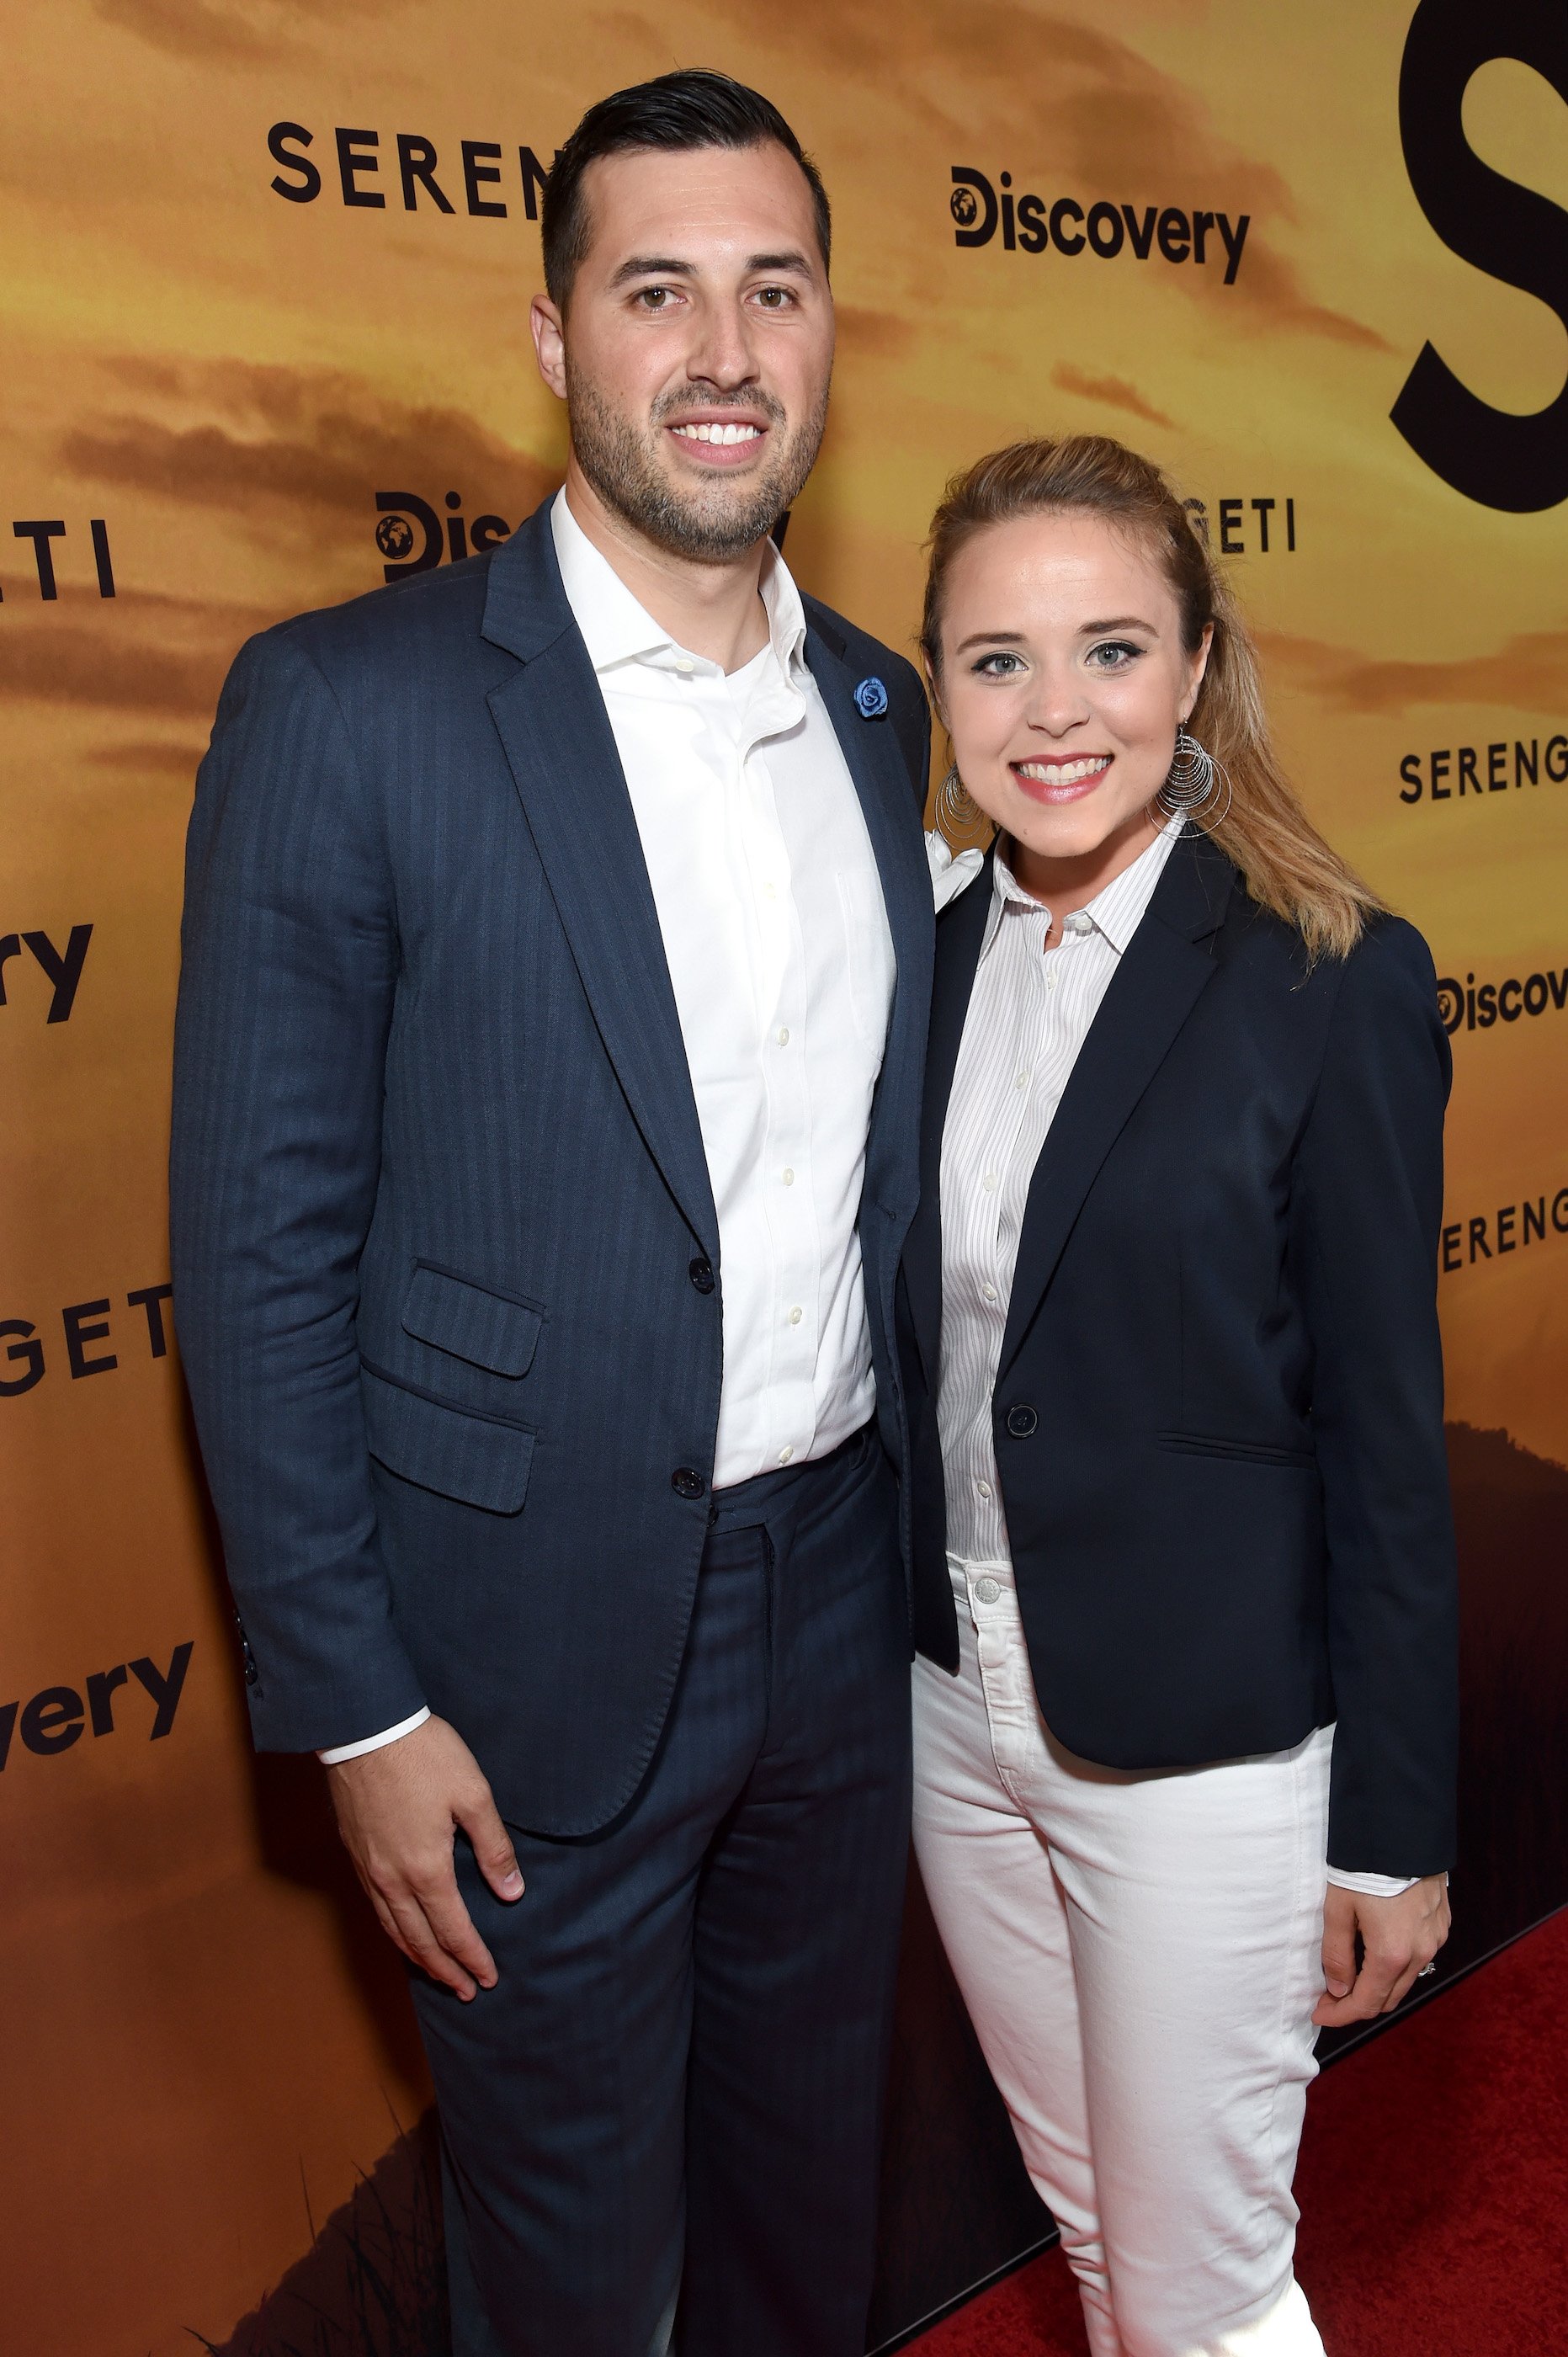 Jinger Duggar from the Duggar family on TLC's 'Counting On' and Jeremy Vuolo smiling at the camera at a movie premiere